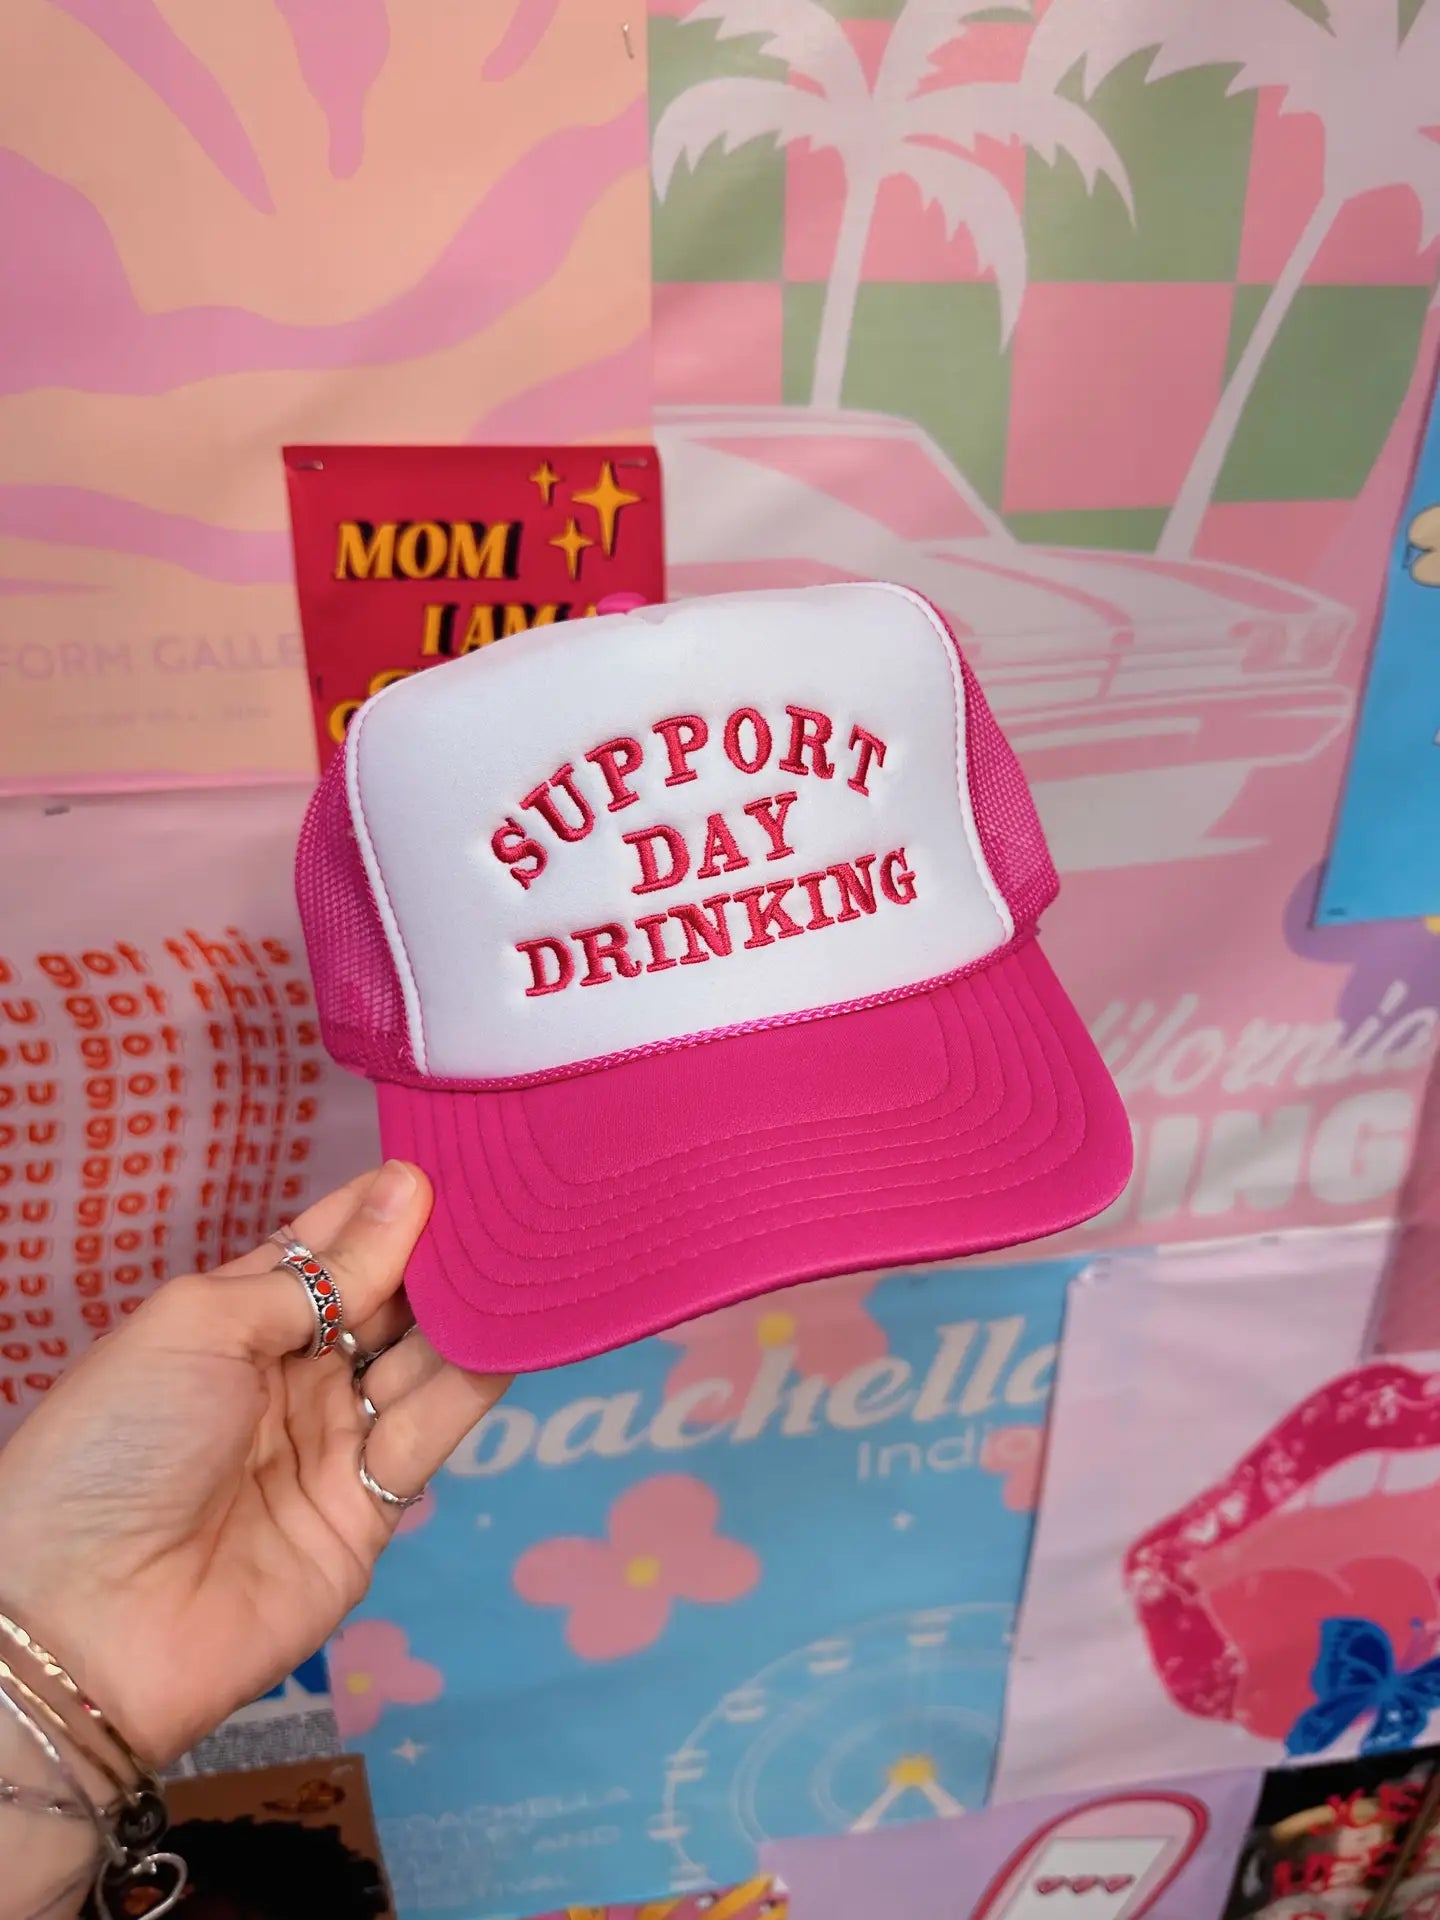 Support Day Drinking Trucker Hat - Hot Pink